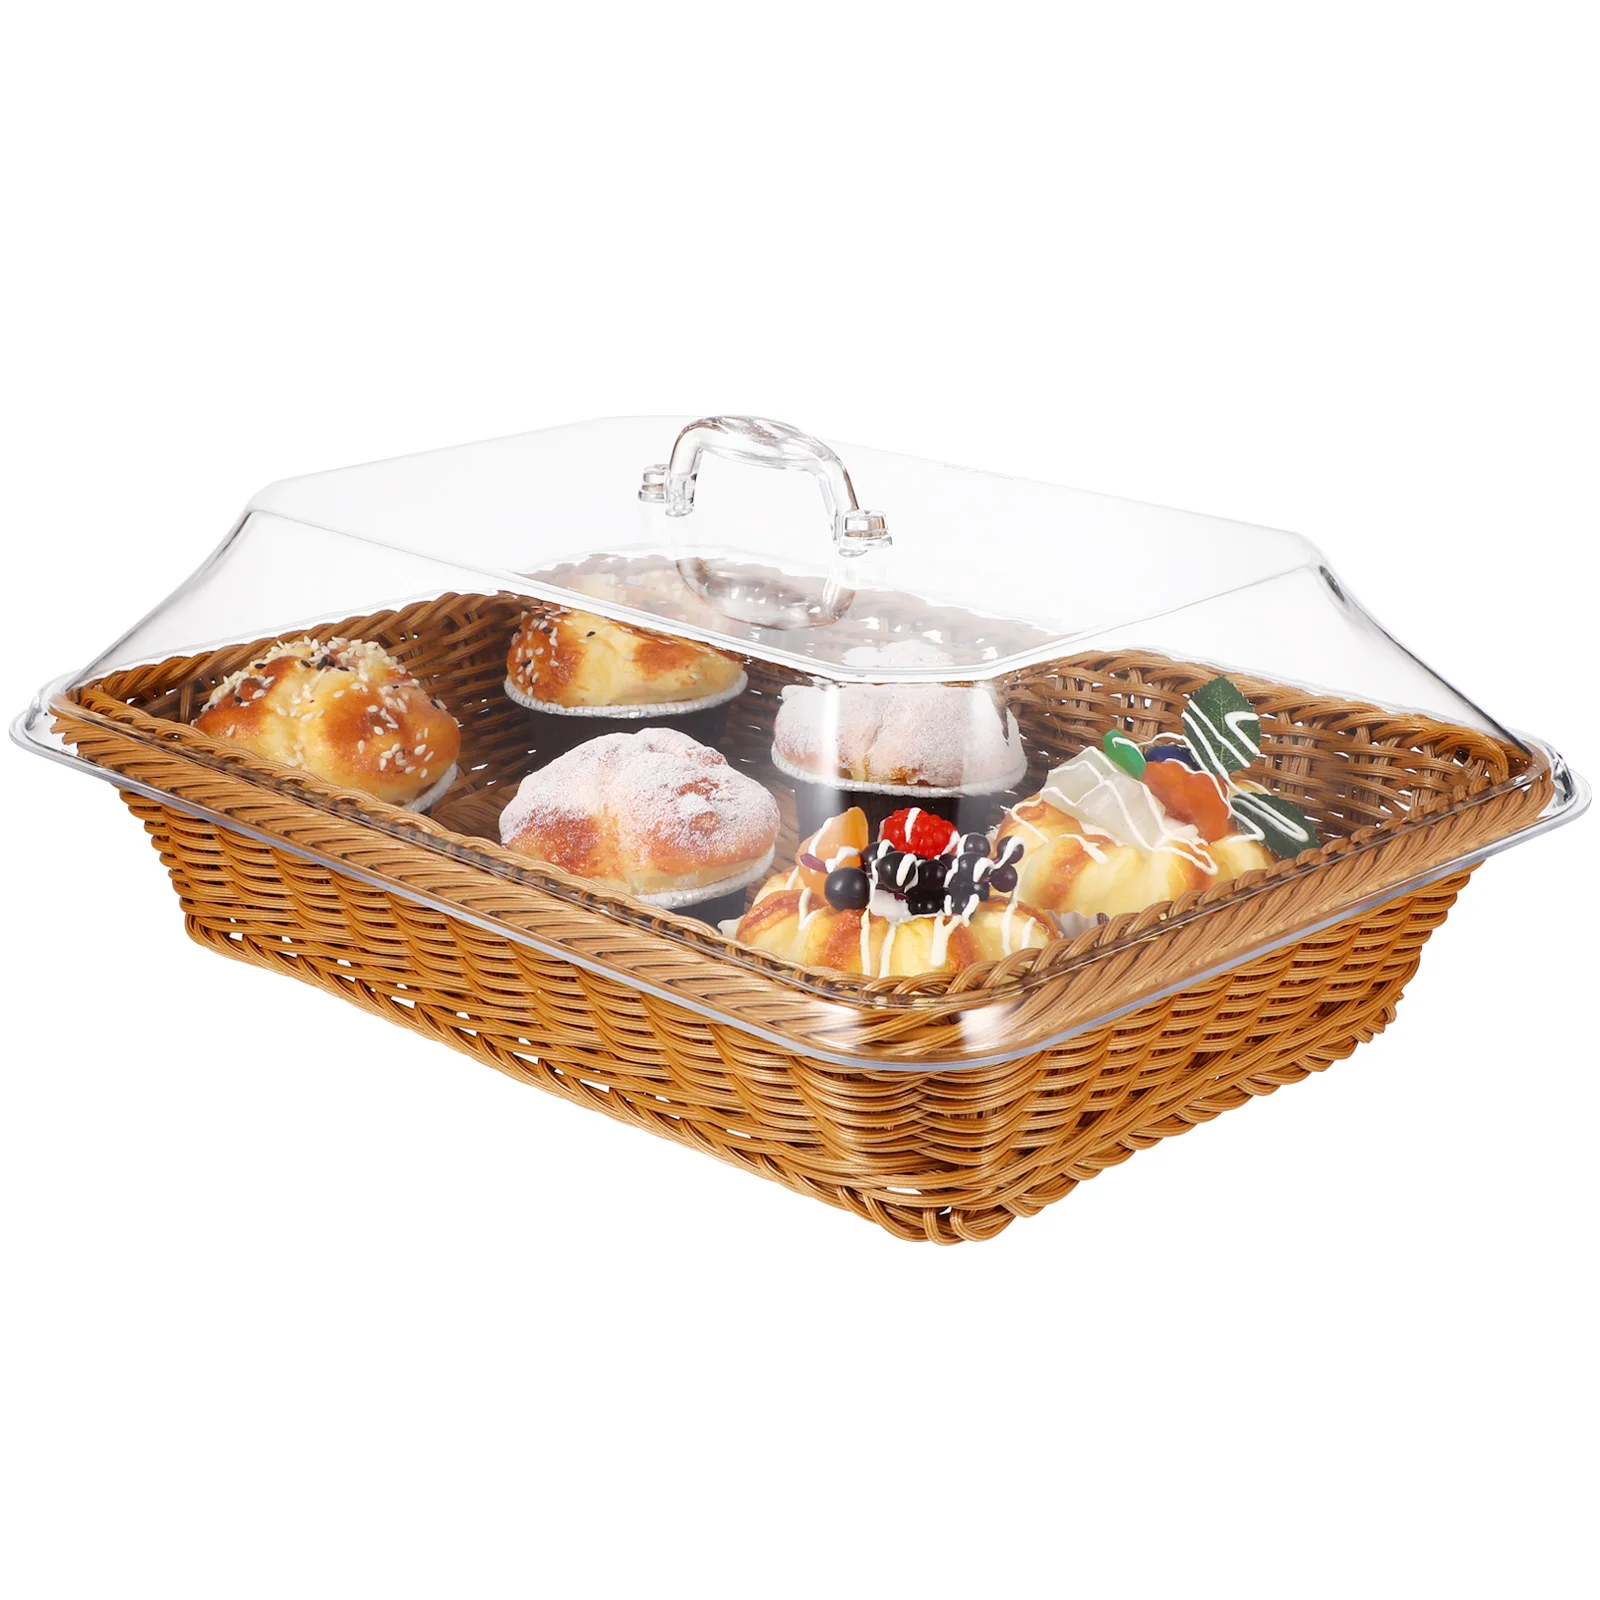 

Imitation Rattan Woven Basket Storage Simulated Baskets Bread Serving Fruit Small Display Containers Vegetable Lid